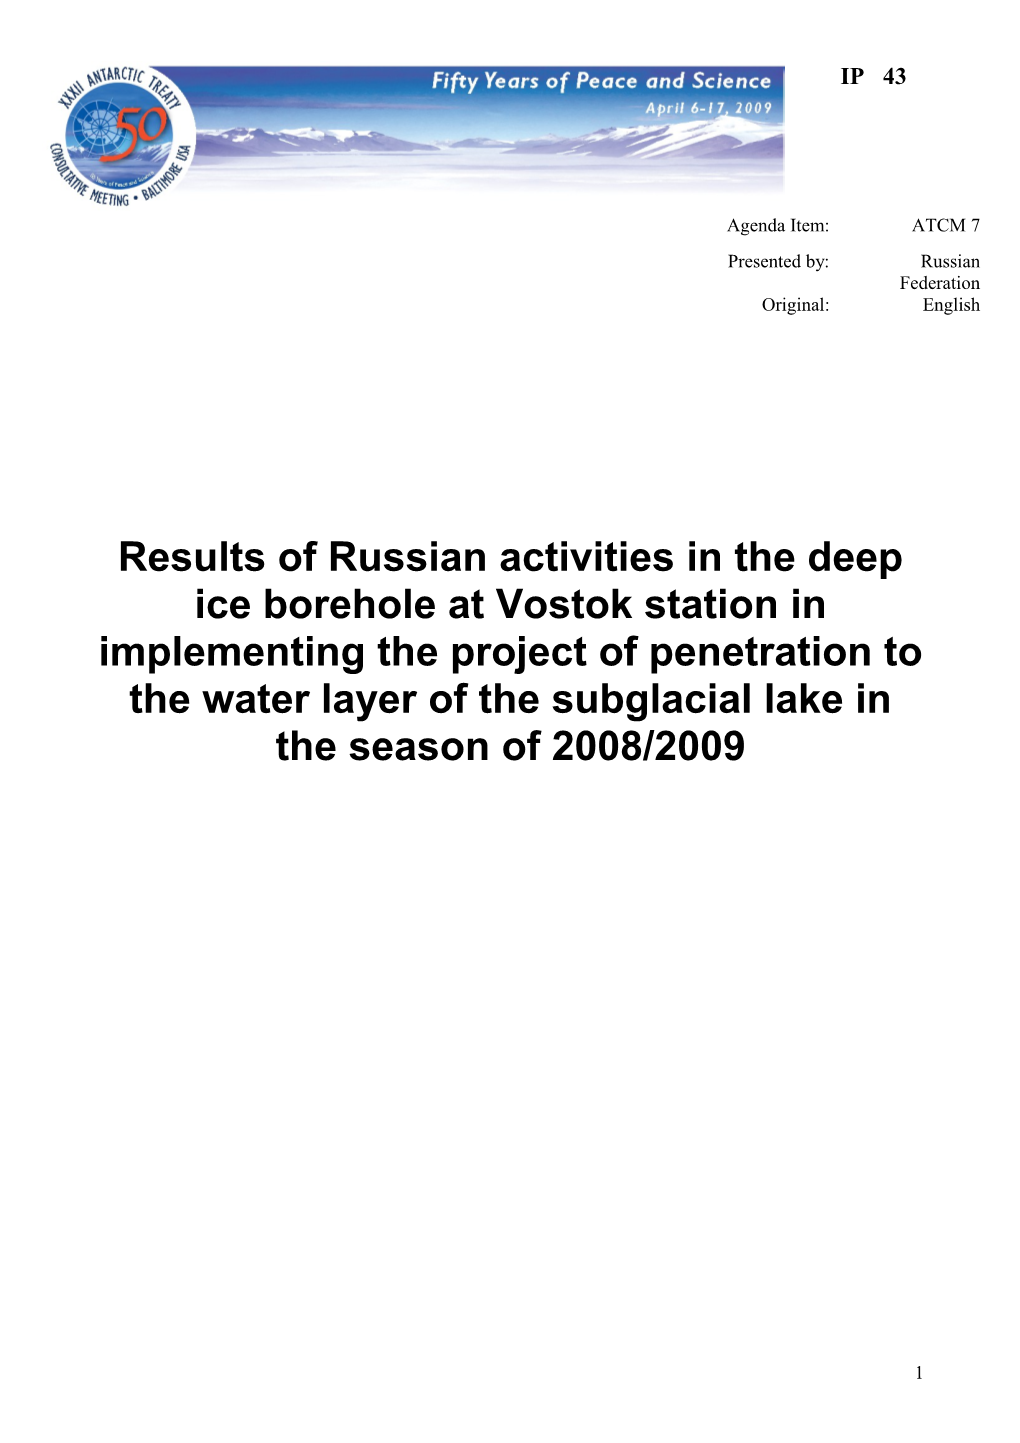 Results of Russian Activities in the Deep Ice Borehole at Vostok Station in Implementing